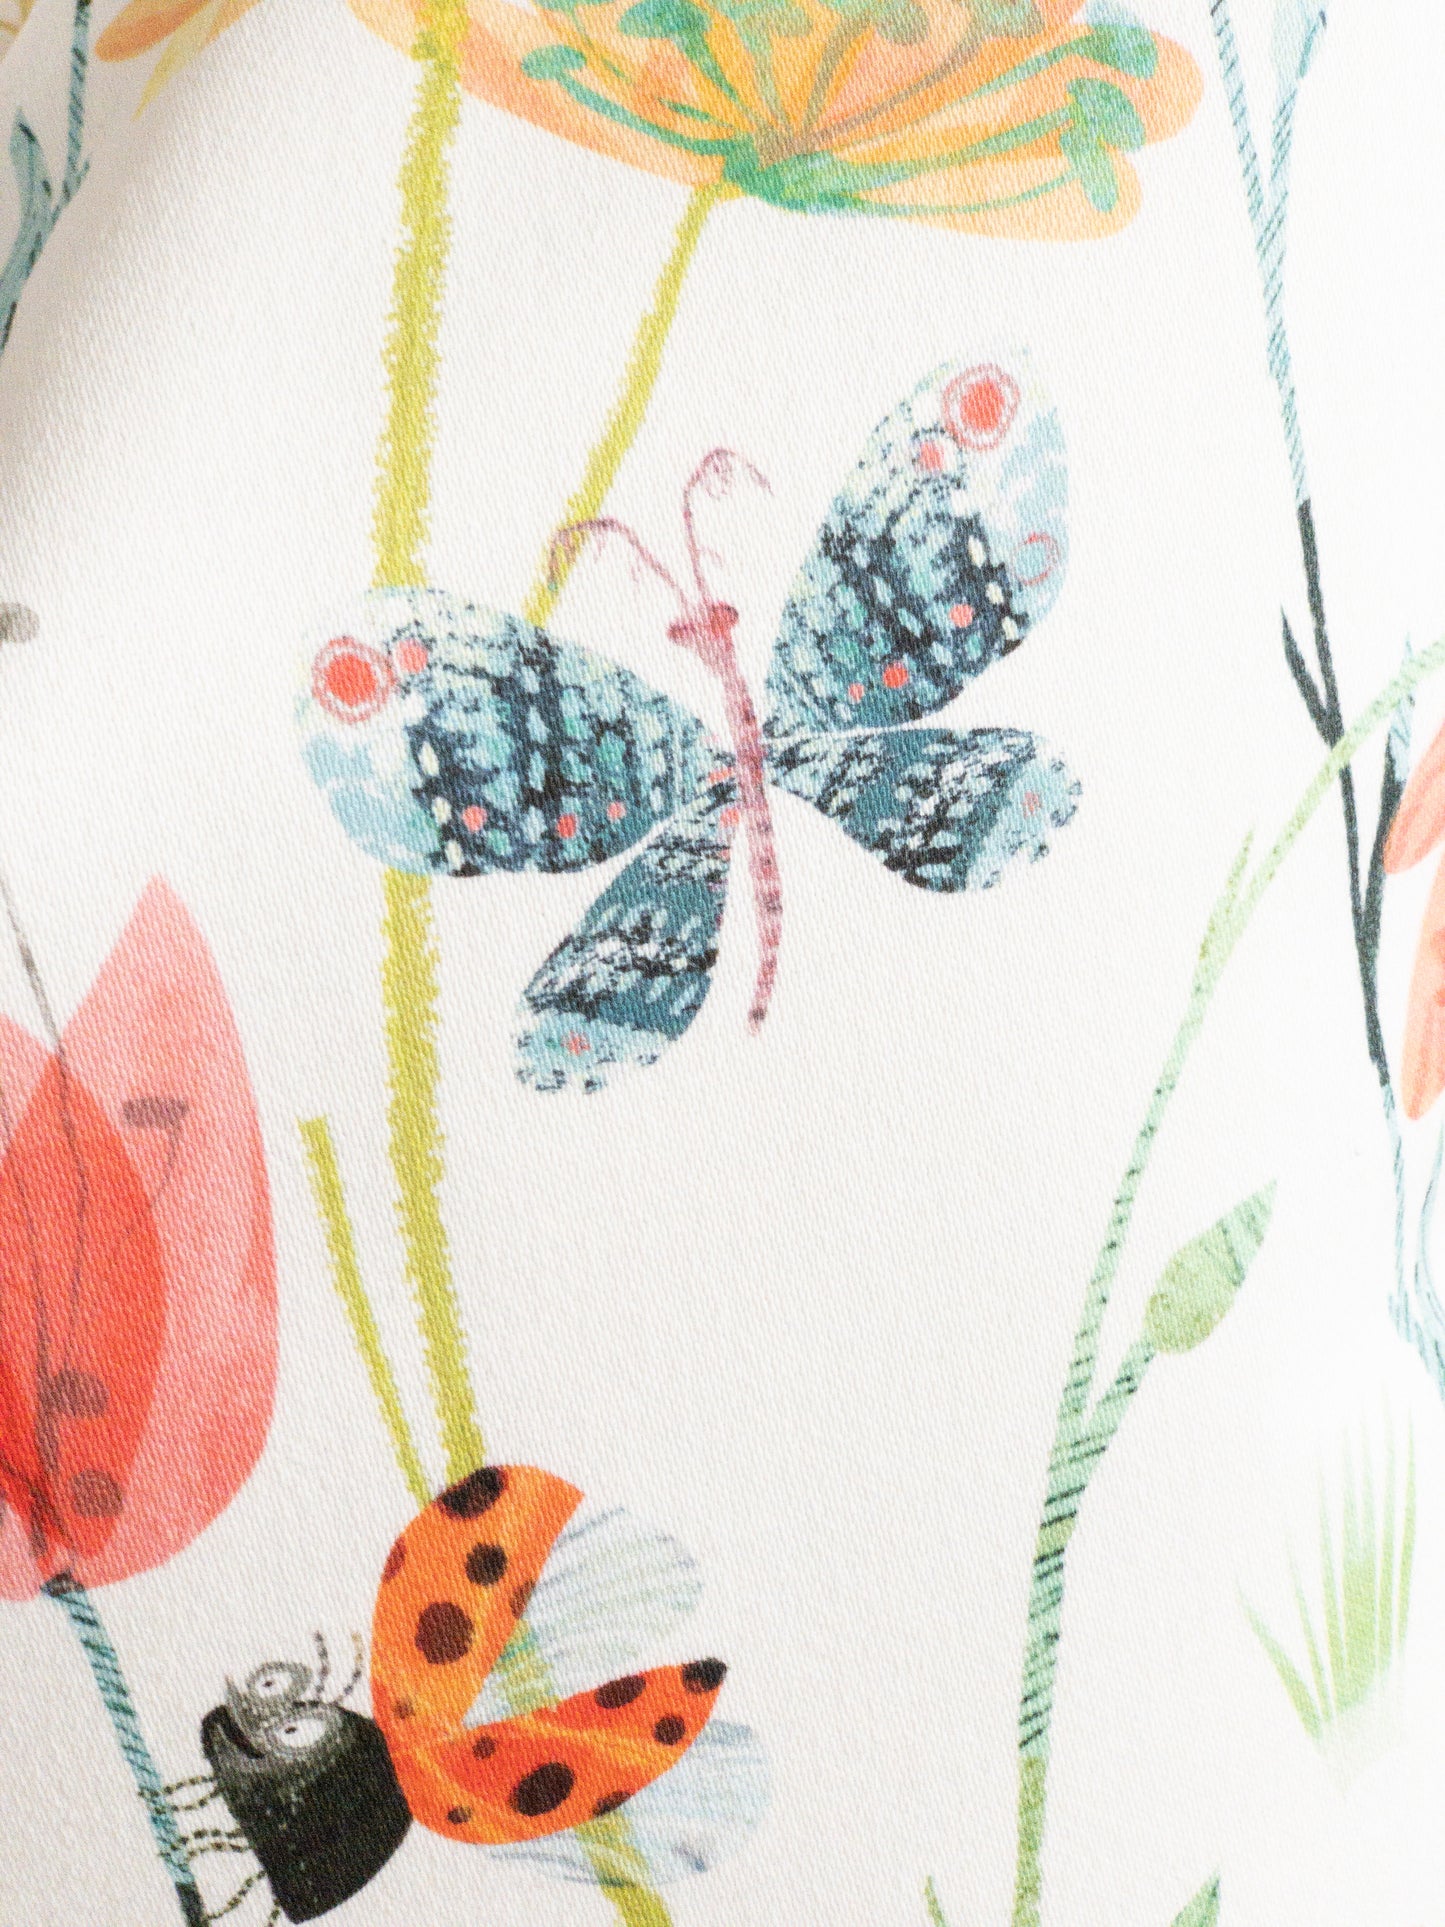 Close up of insect and floral decorative pillow with brightly colored butterflies and ladybugs on a white background.